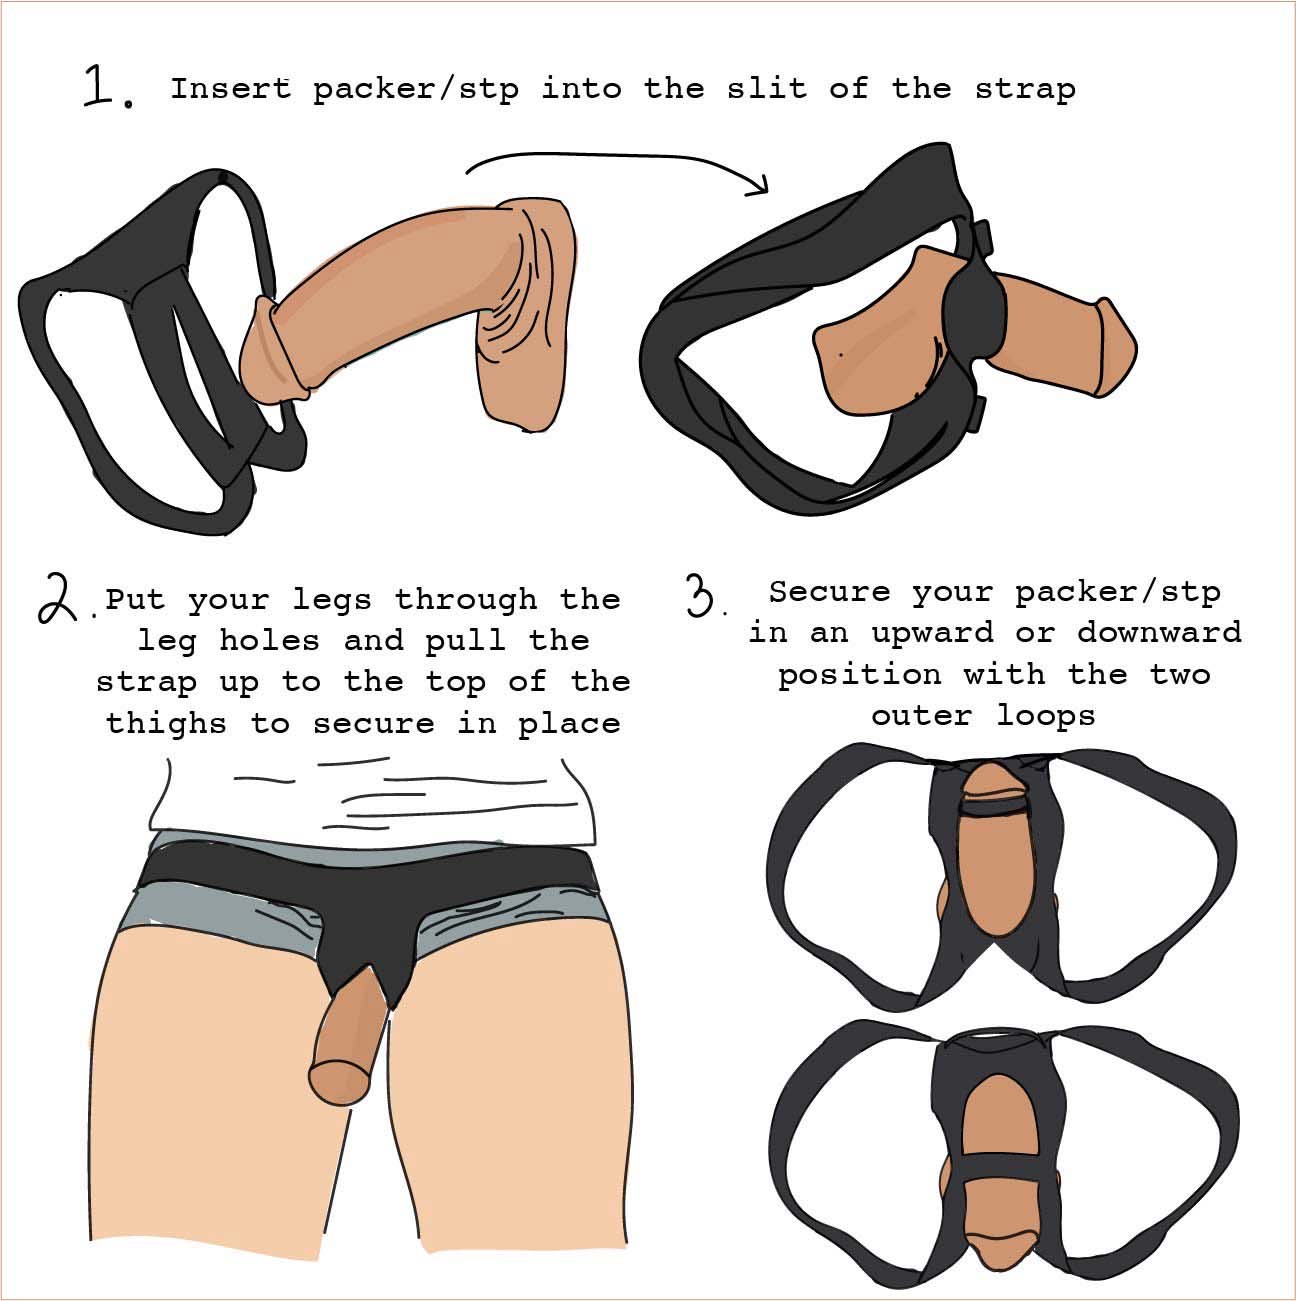 Directions for inserting an STP packer into a STP strap.